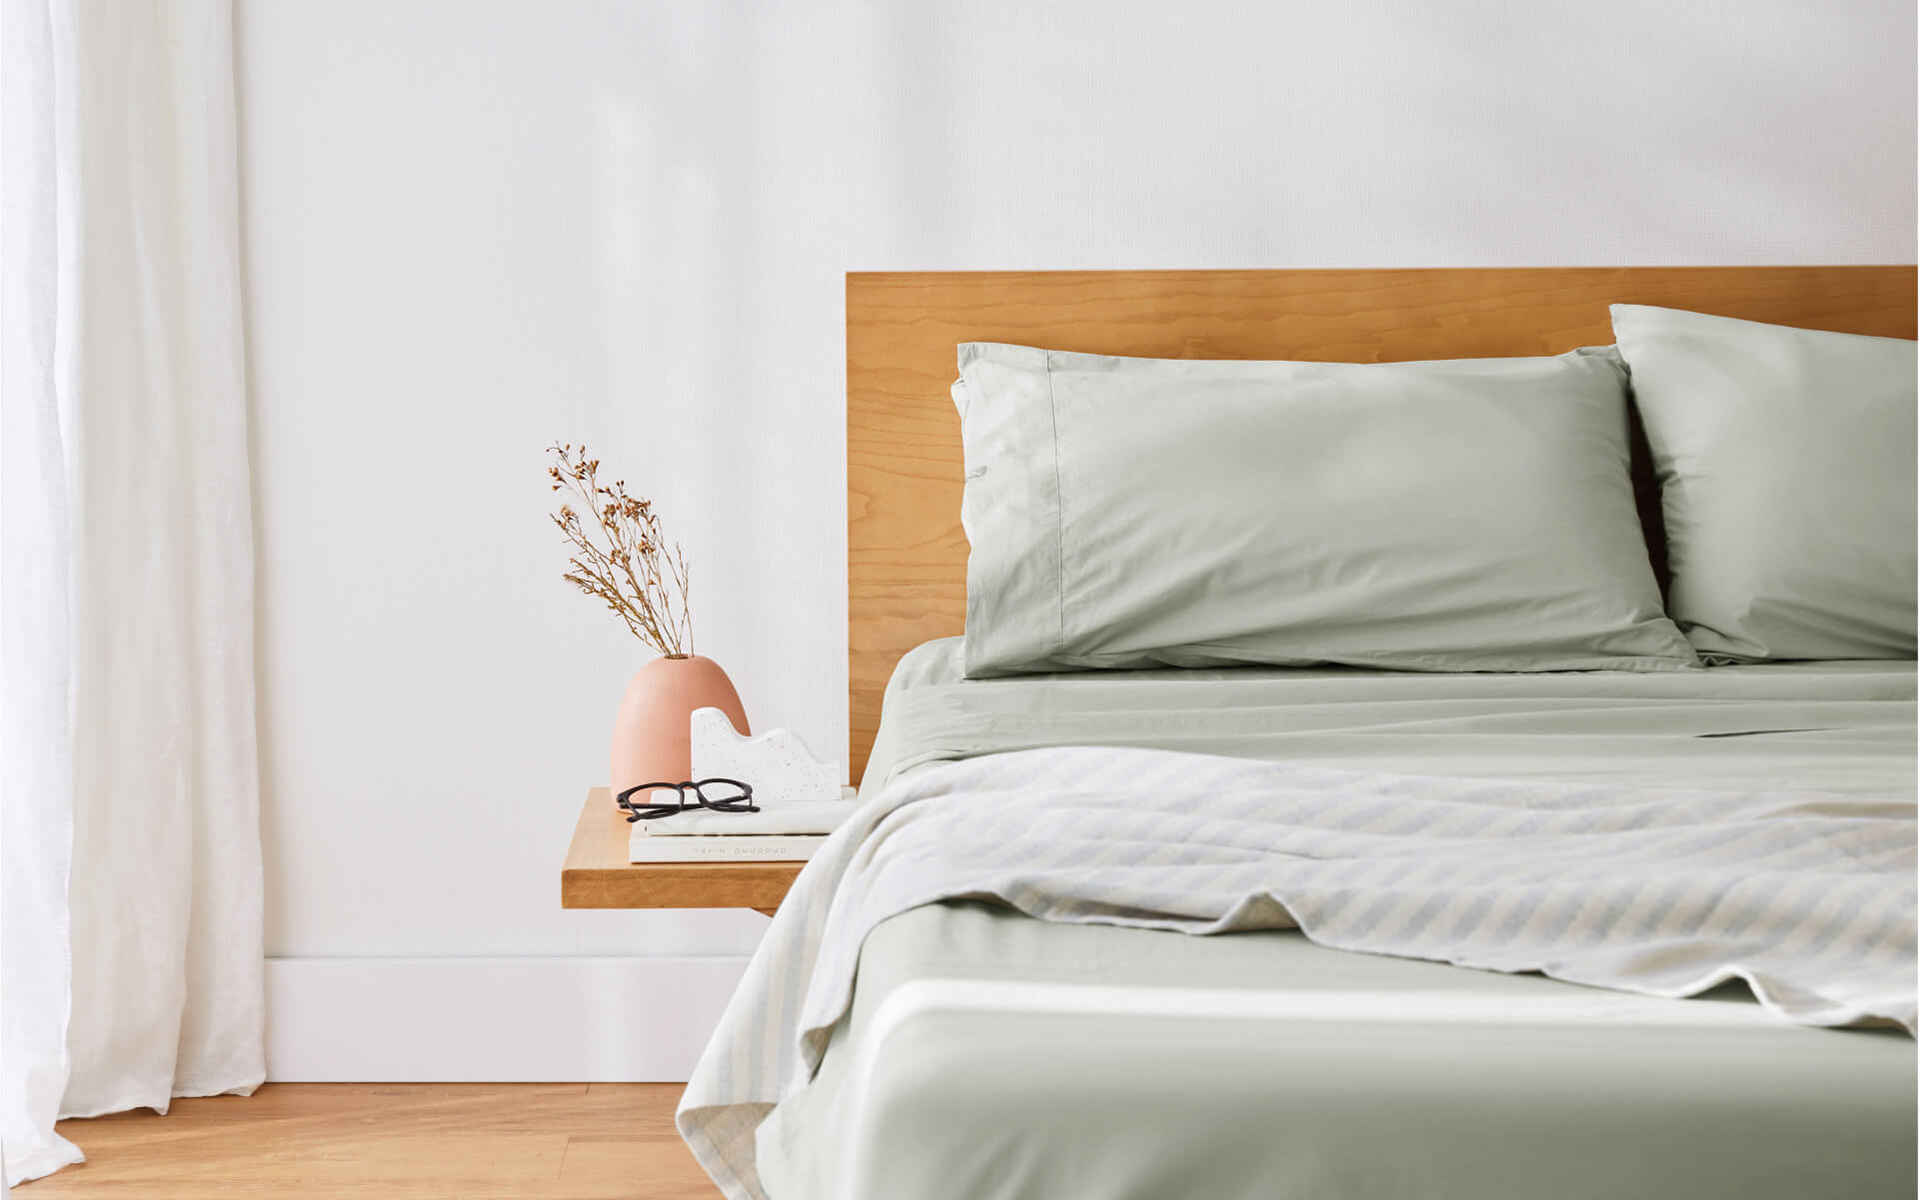  A close-up image of the corner of a bed with beautiful soft sheets, timber headboard and side table in a clean, modern bedroom